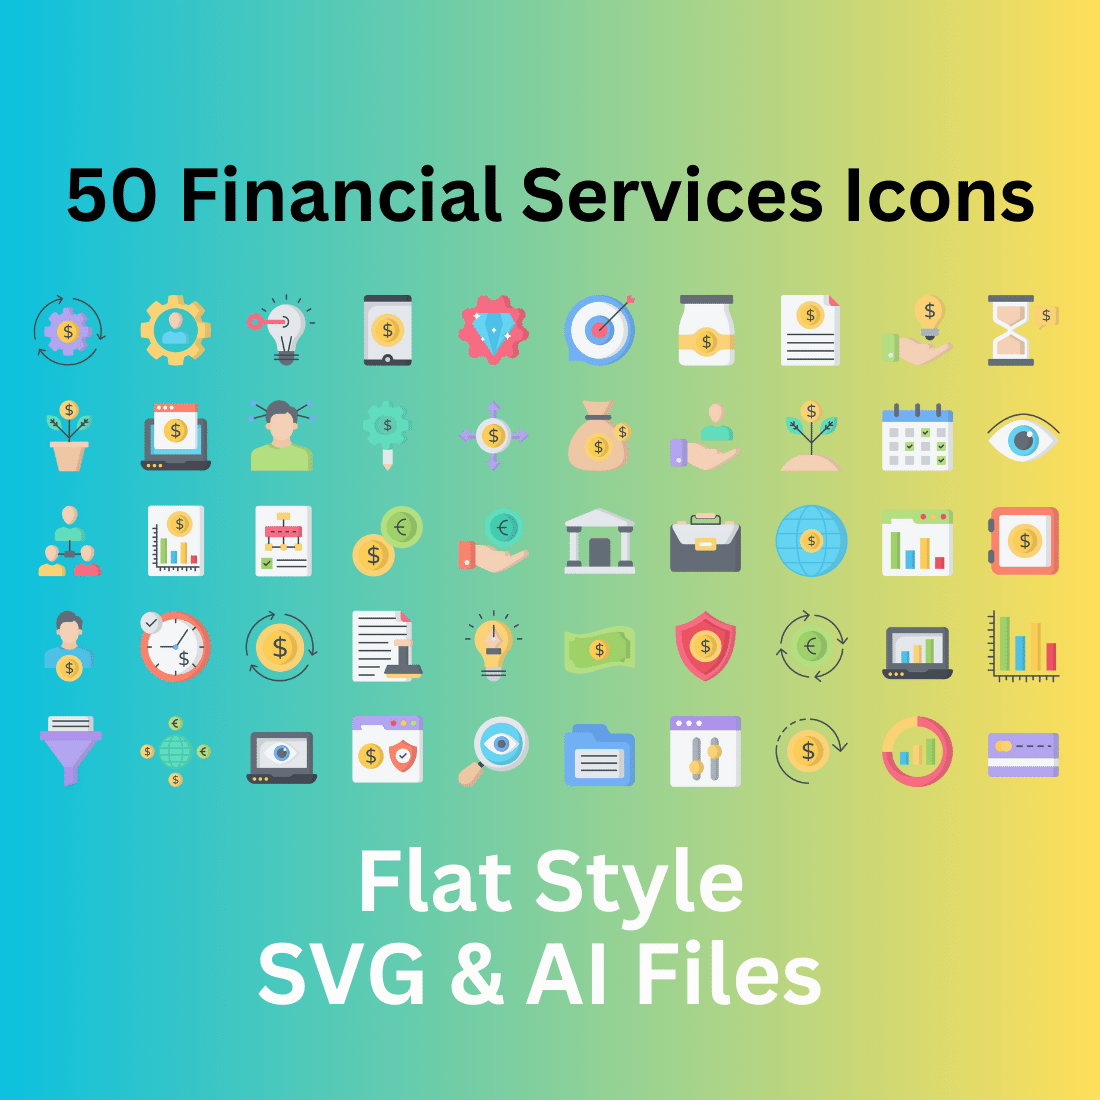 Financial Services Icon Set 50 Flat Icons - SVG And AI Files cover image.